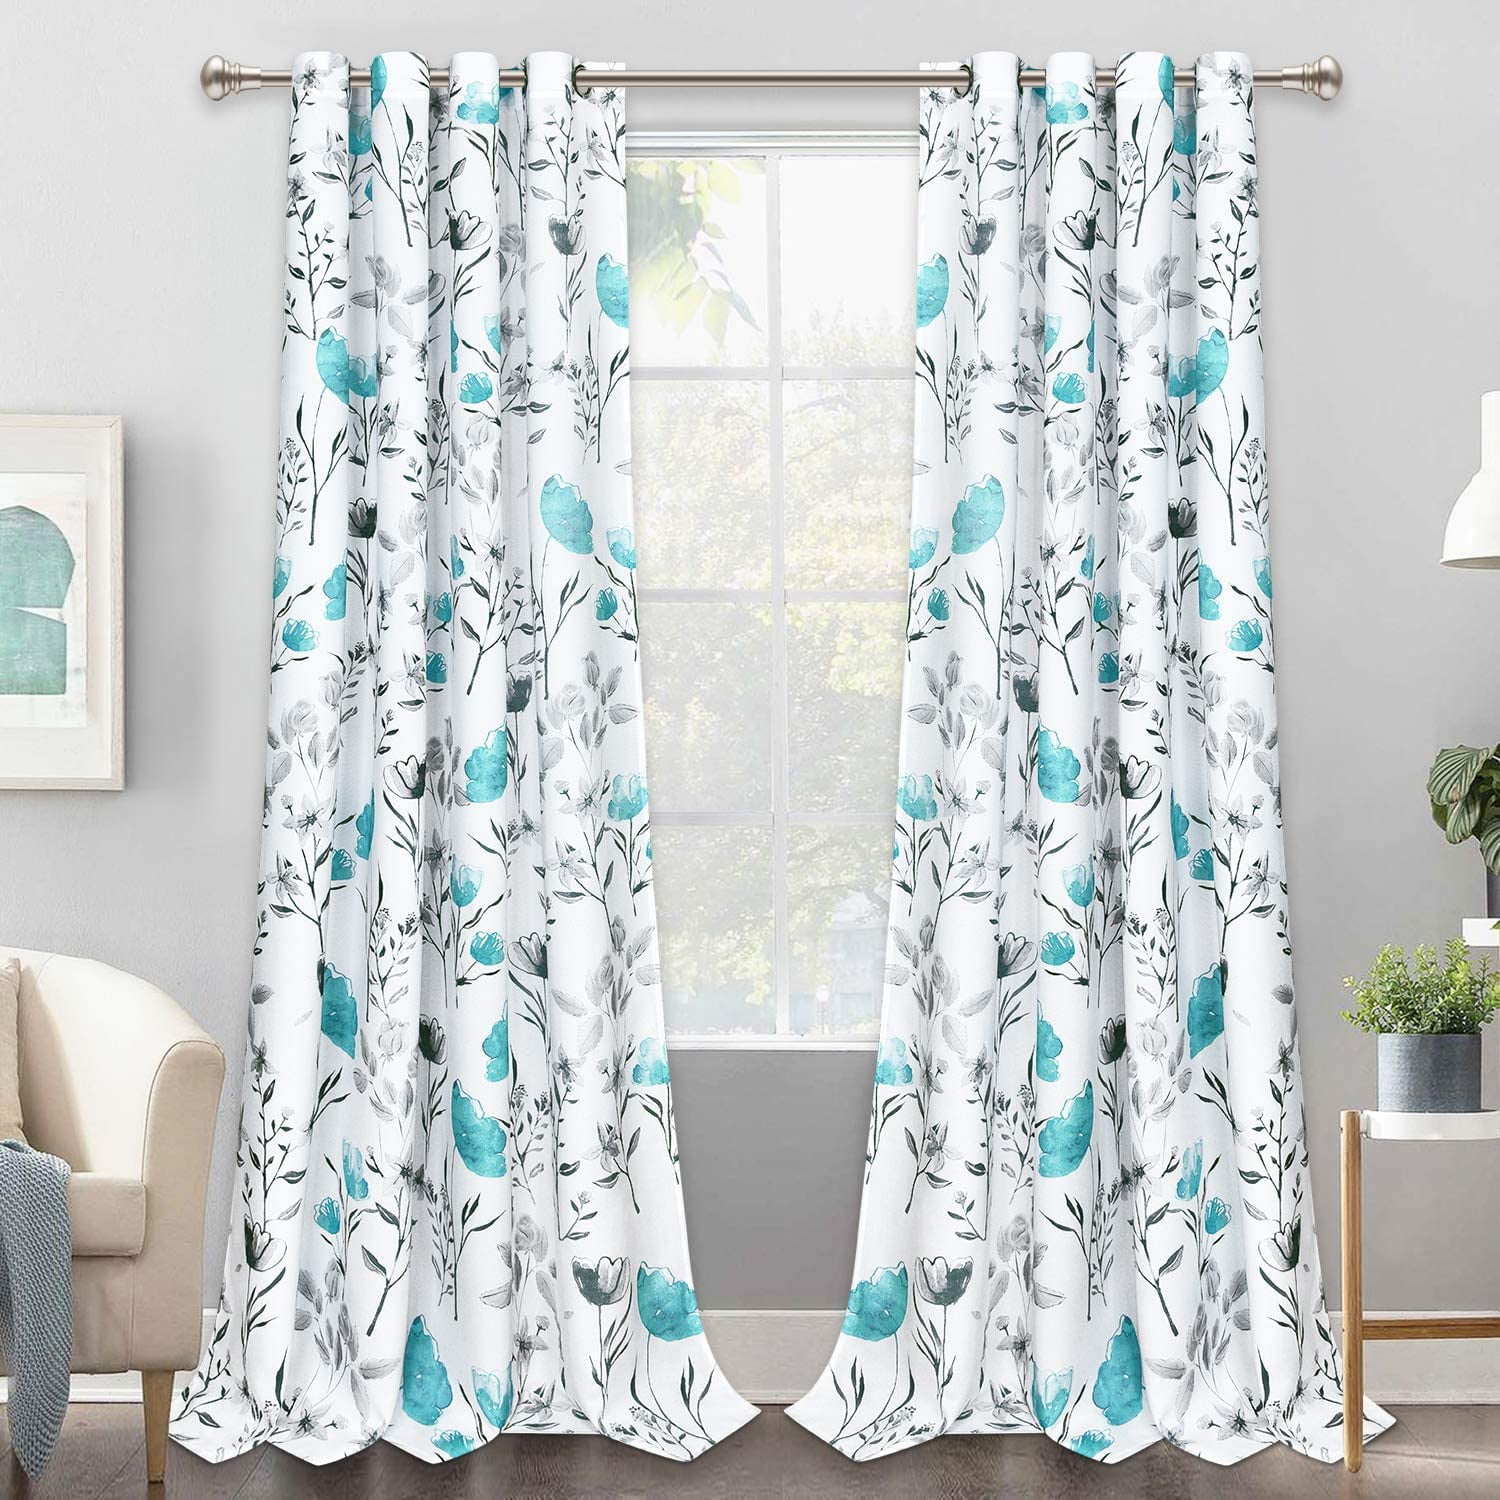 Caltero 2 Panels Teal Curtains Fall Floral Window Curtains Light ...